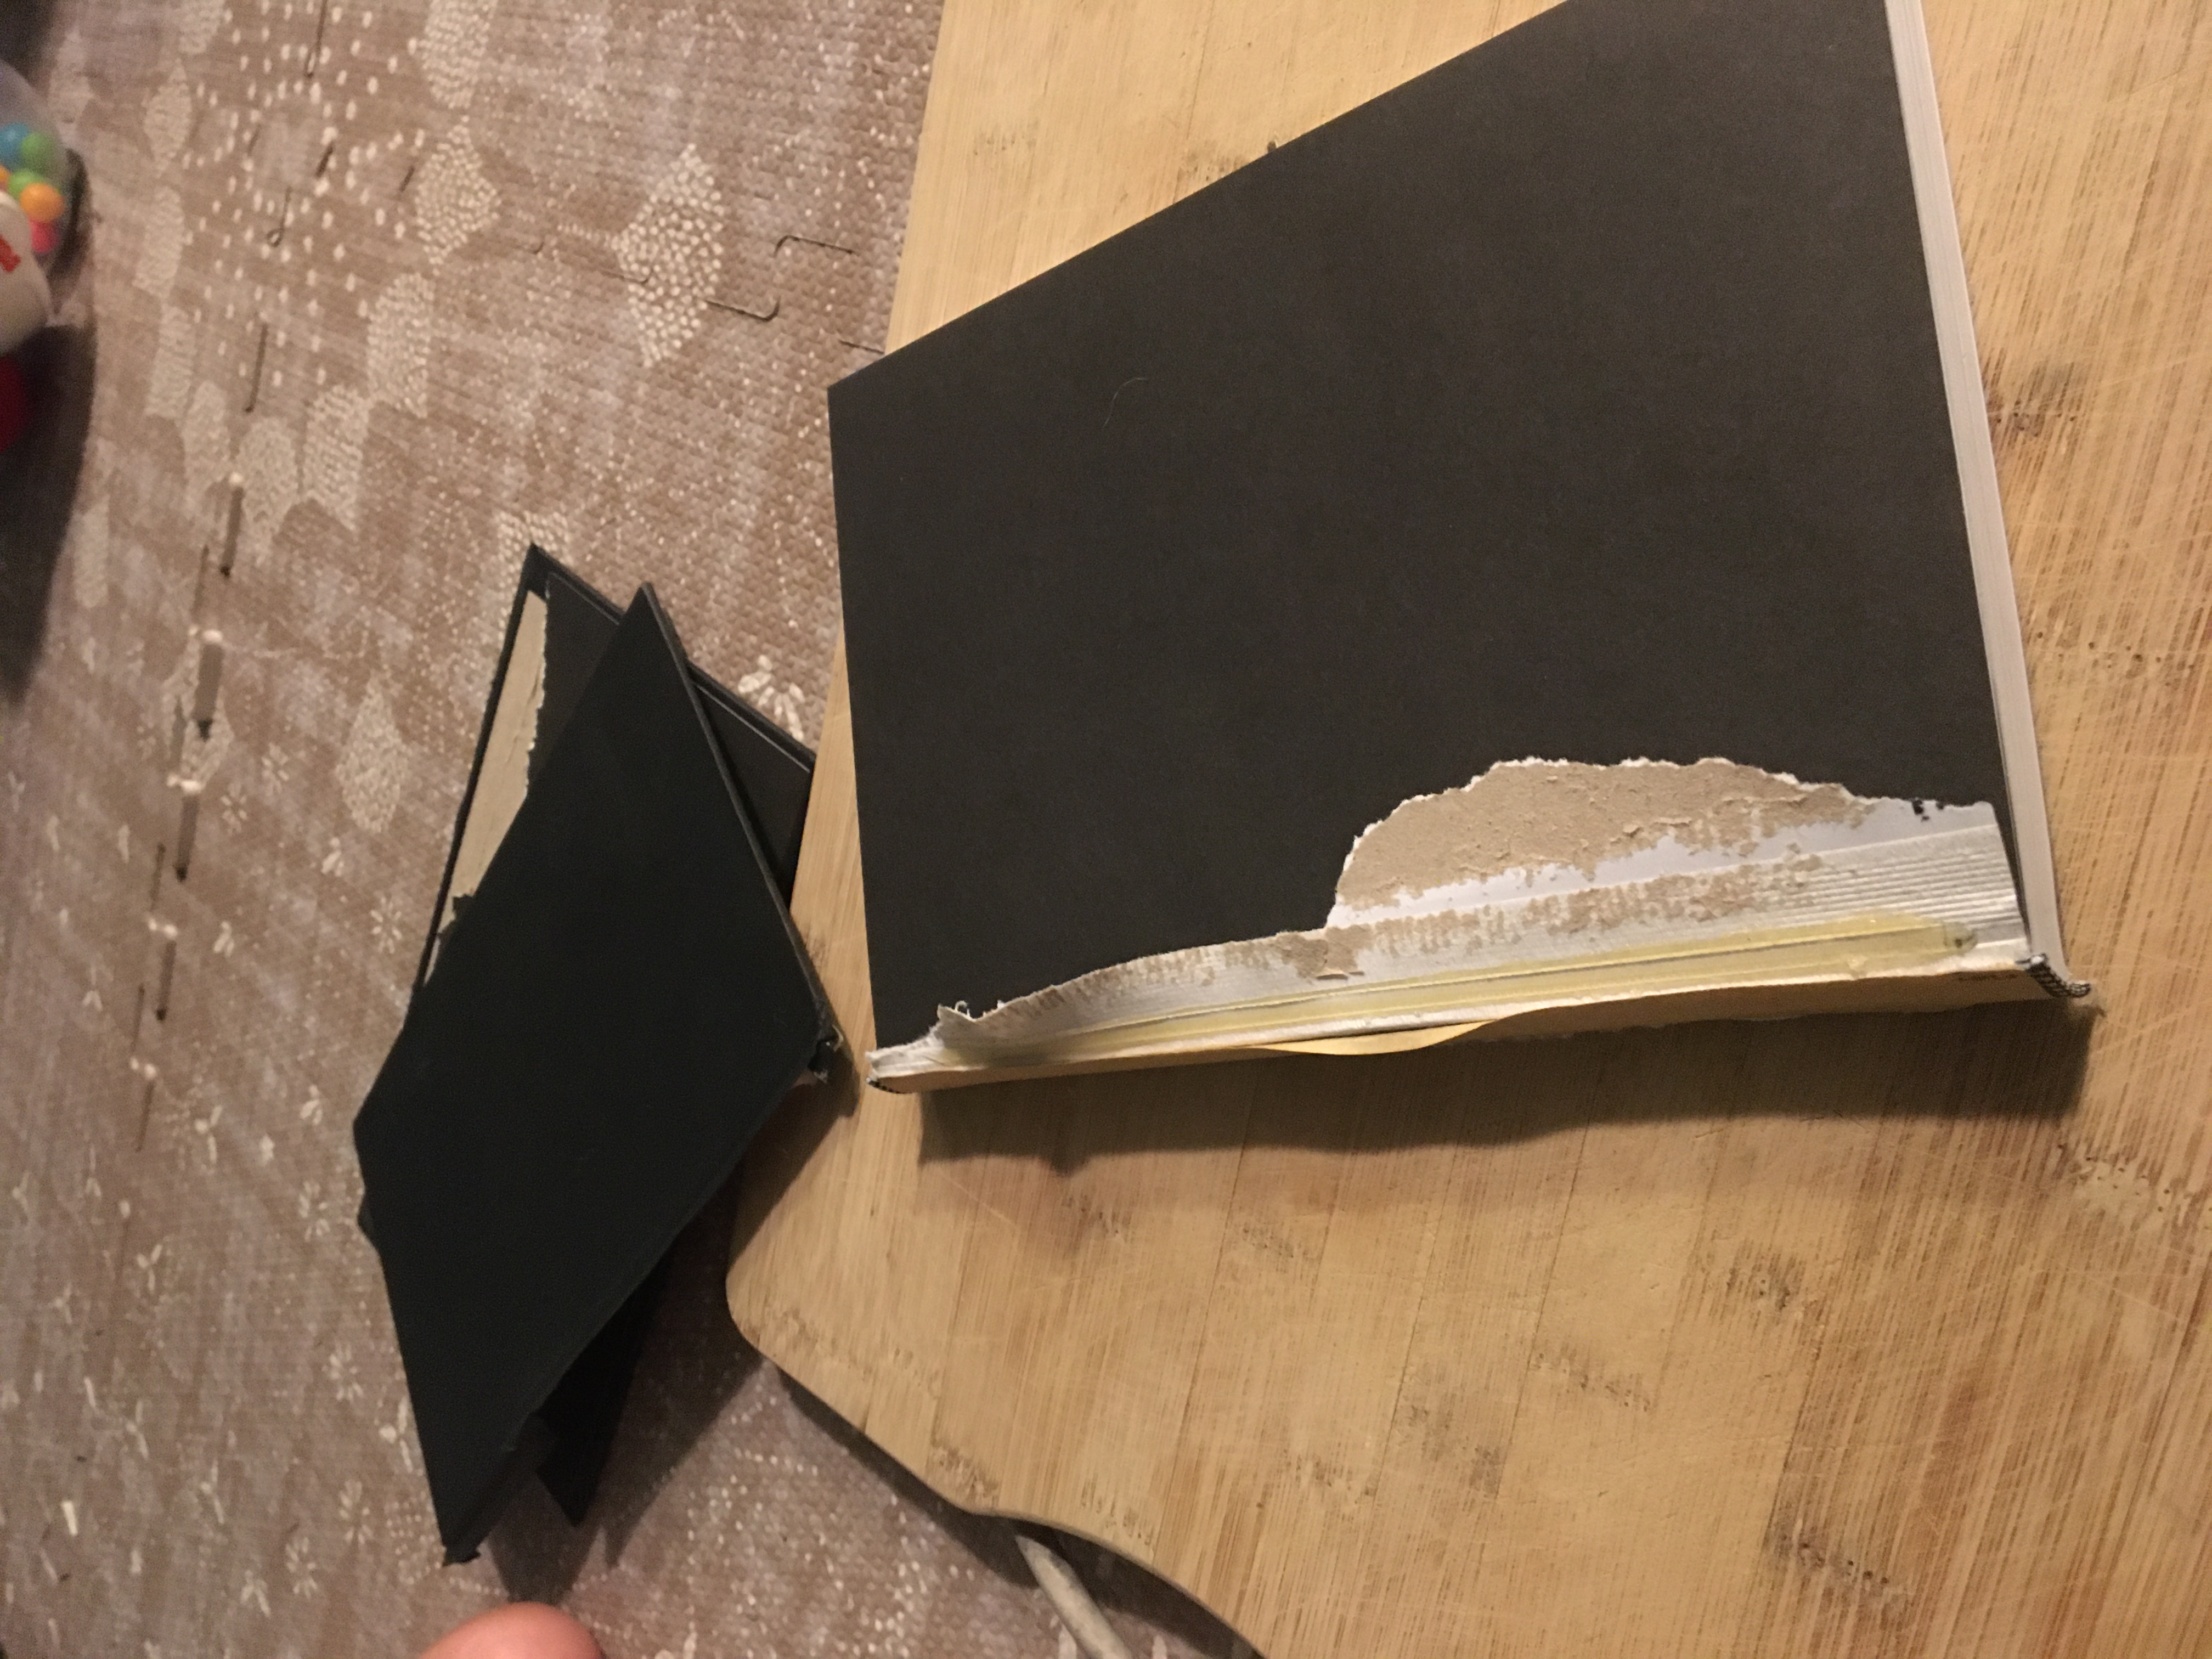 Removing front cover of a physical book